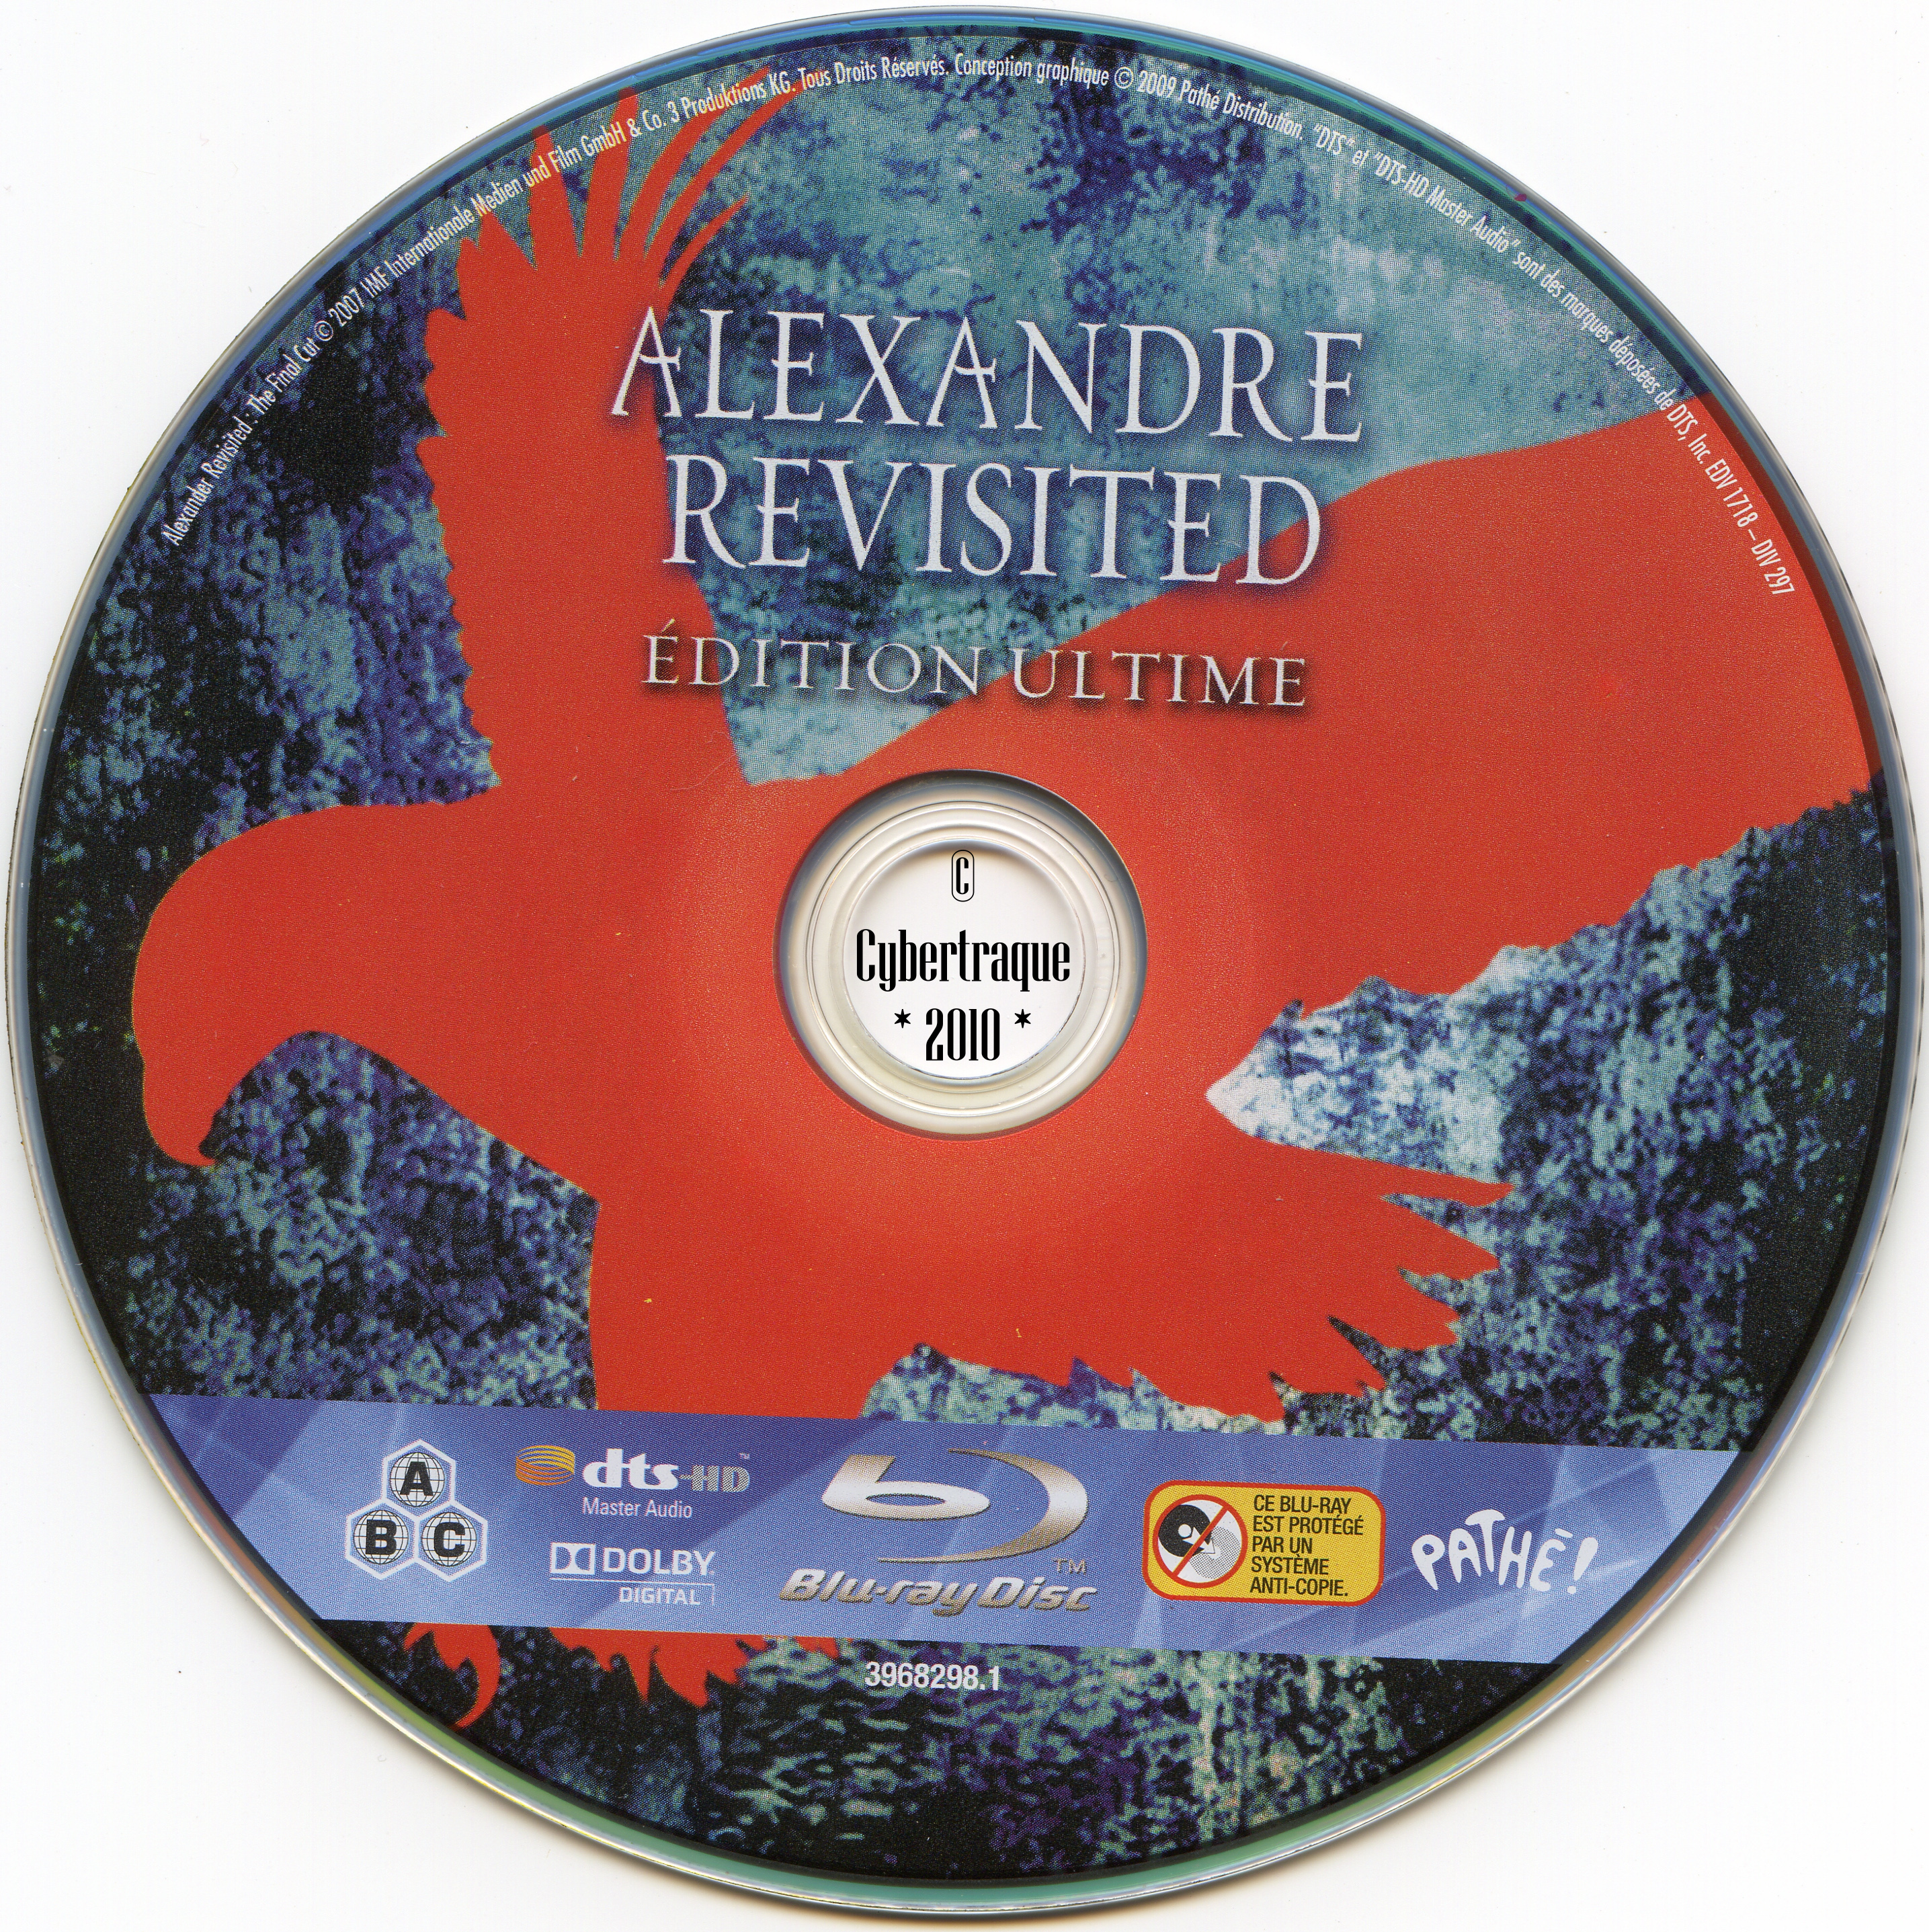 Alexandre revisited (BLU-RAY)